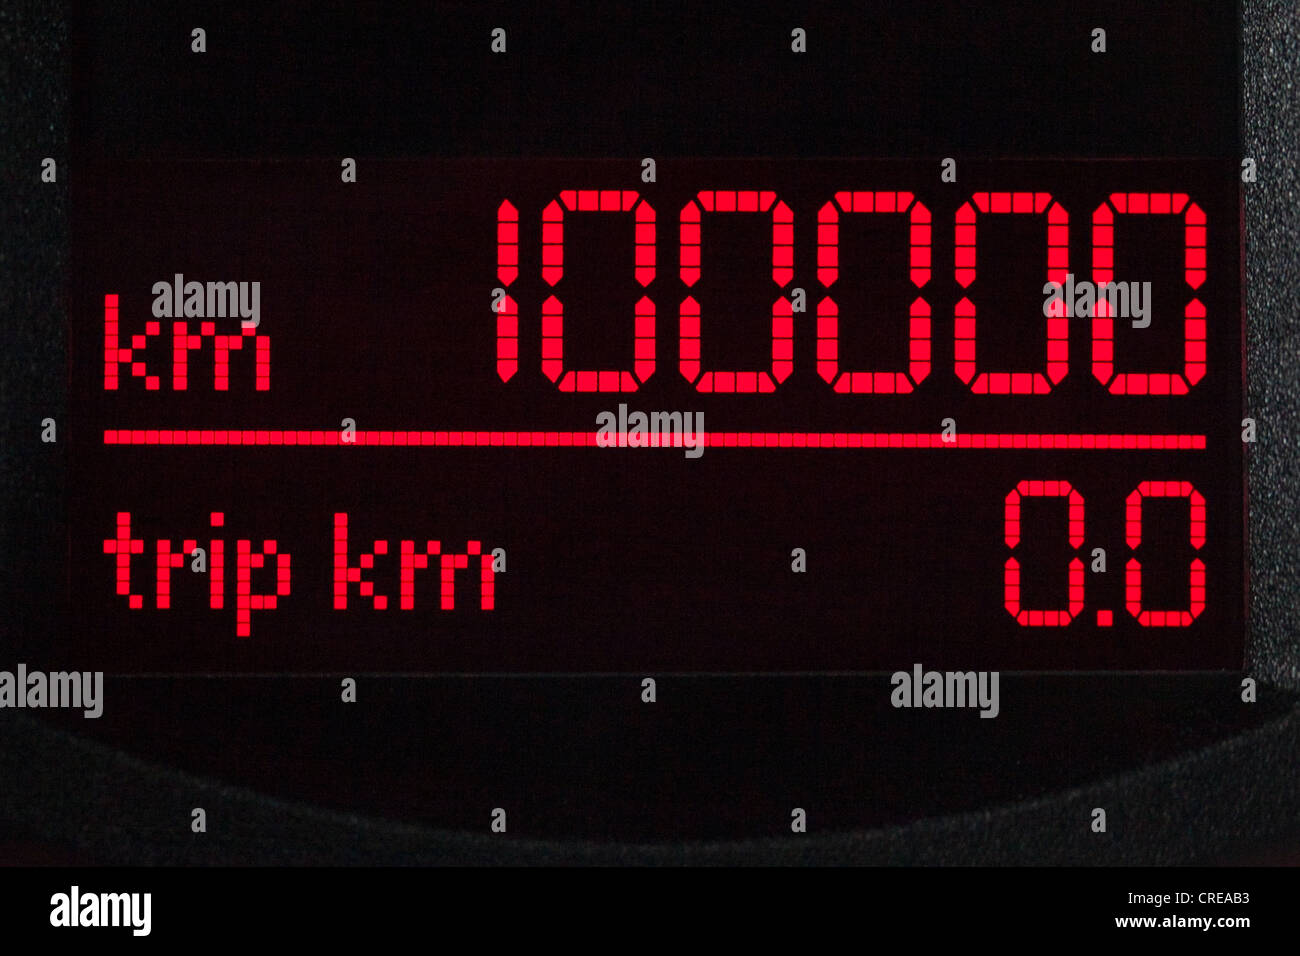 Speedometer, mileage of 100, 000 kilometers in the instrument panel in the cockpit of a Volkswagen, VW Stock Photo